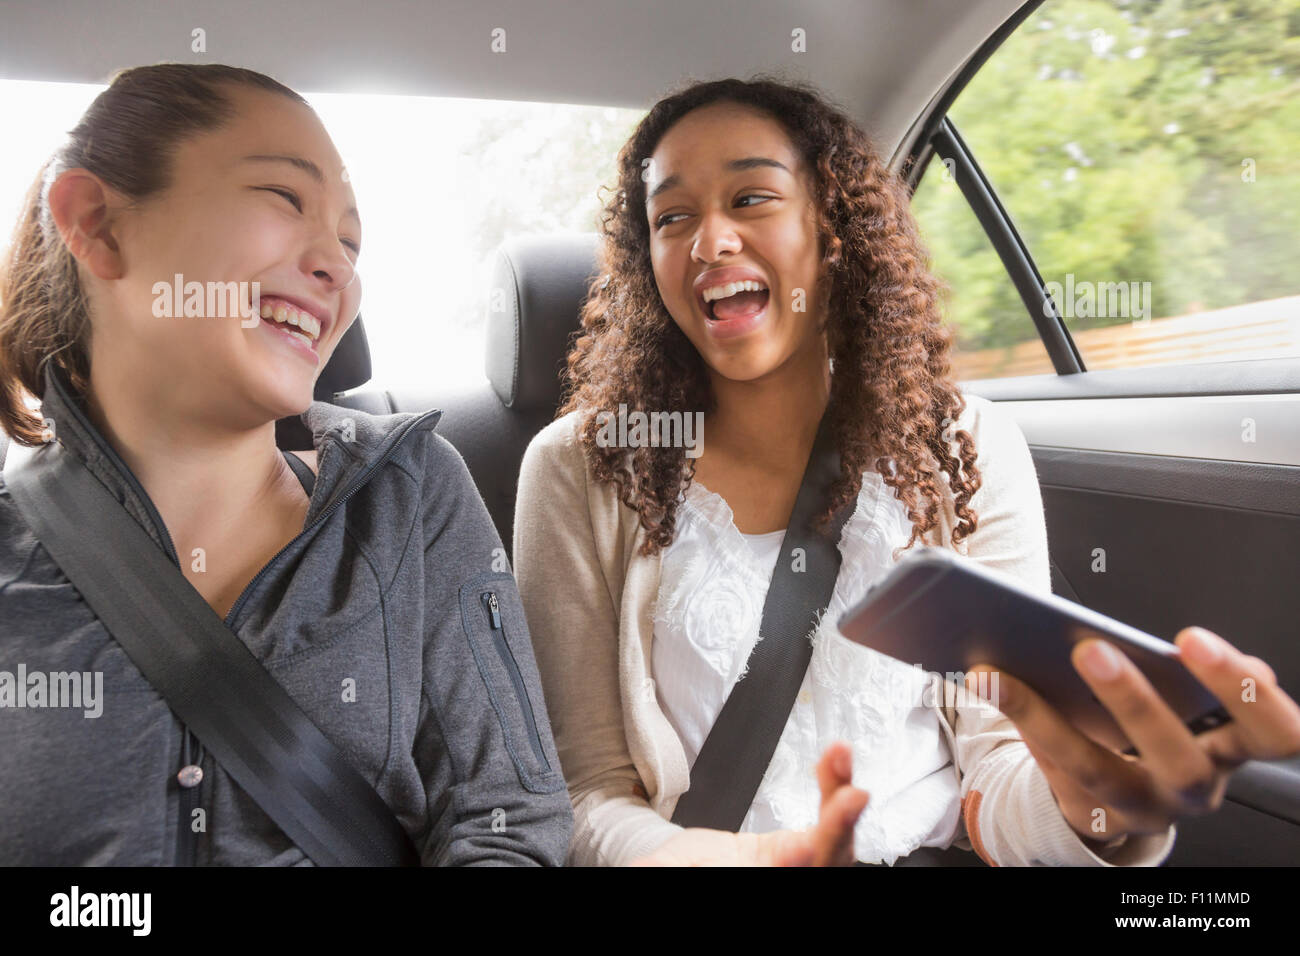 Teenage Girls using cell phone in car siège arrière Banque D'Images